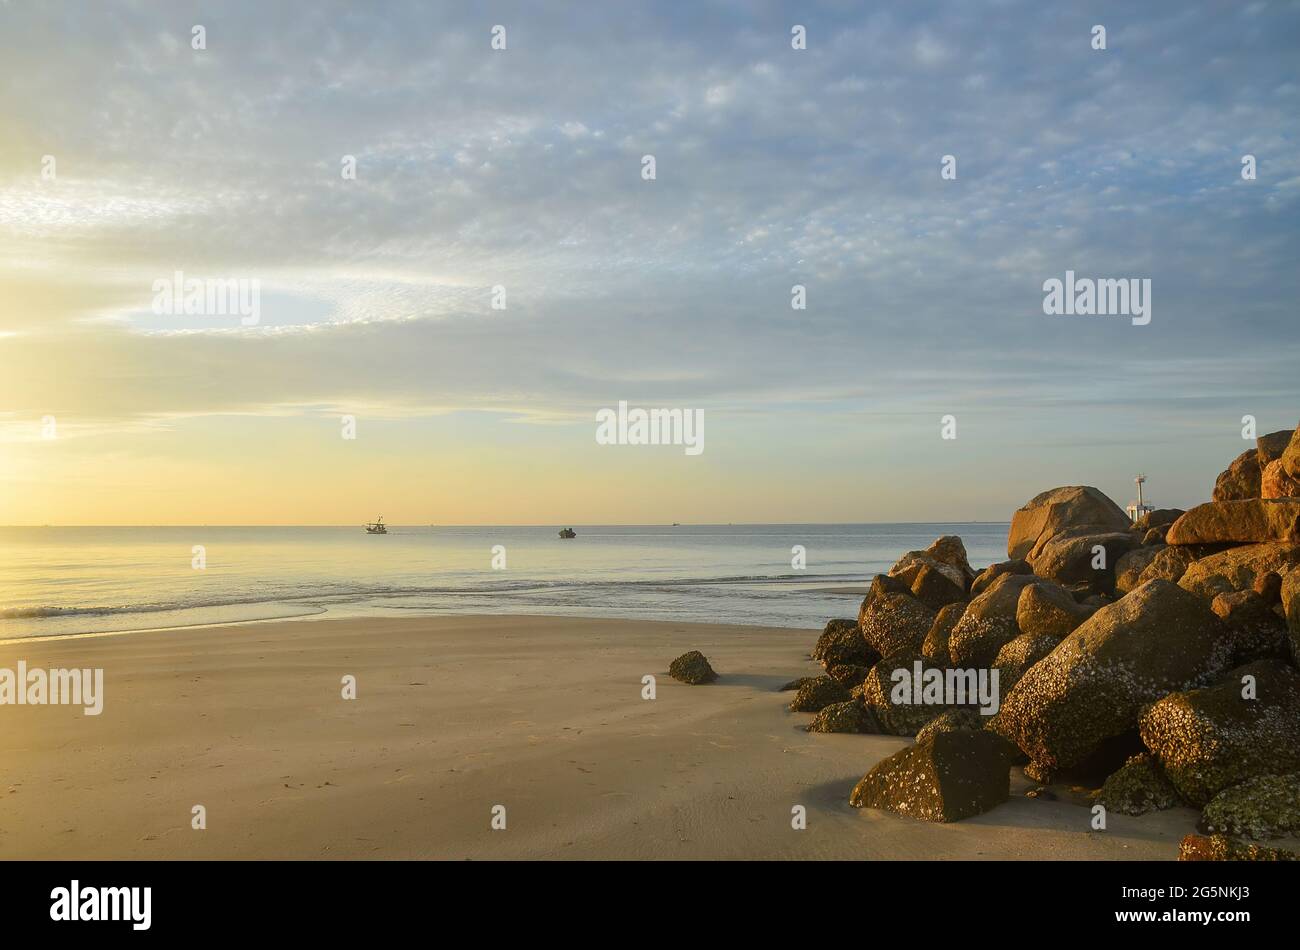 Colourful glowing pastel cirrostratus cloudy tropical beach sunrise seascape. Waterfront at dawn featuring a rock outcrop. Huay Yang, Thailand. Stock Photo